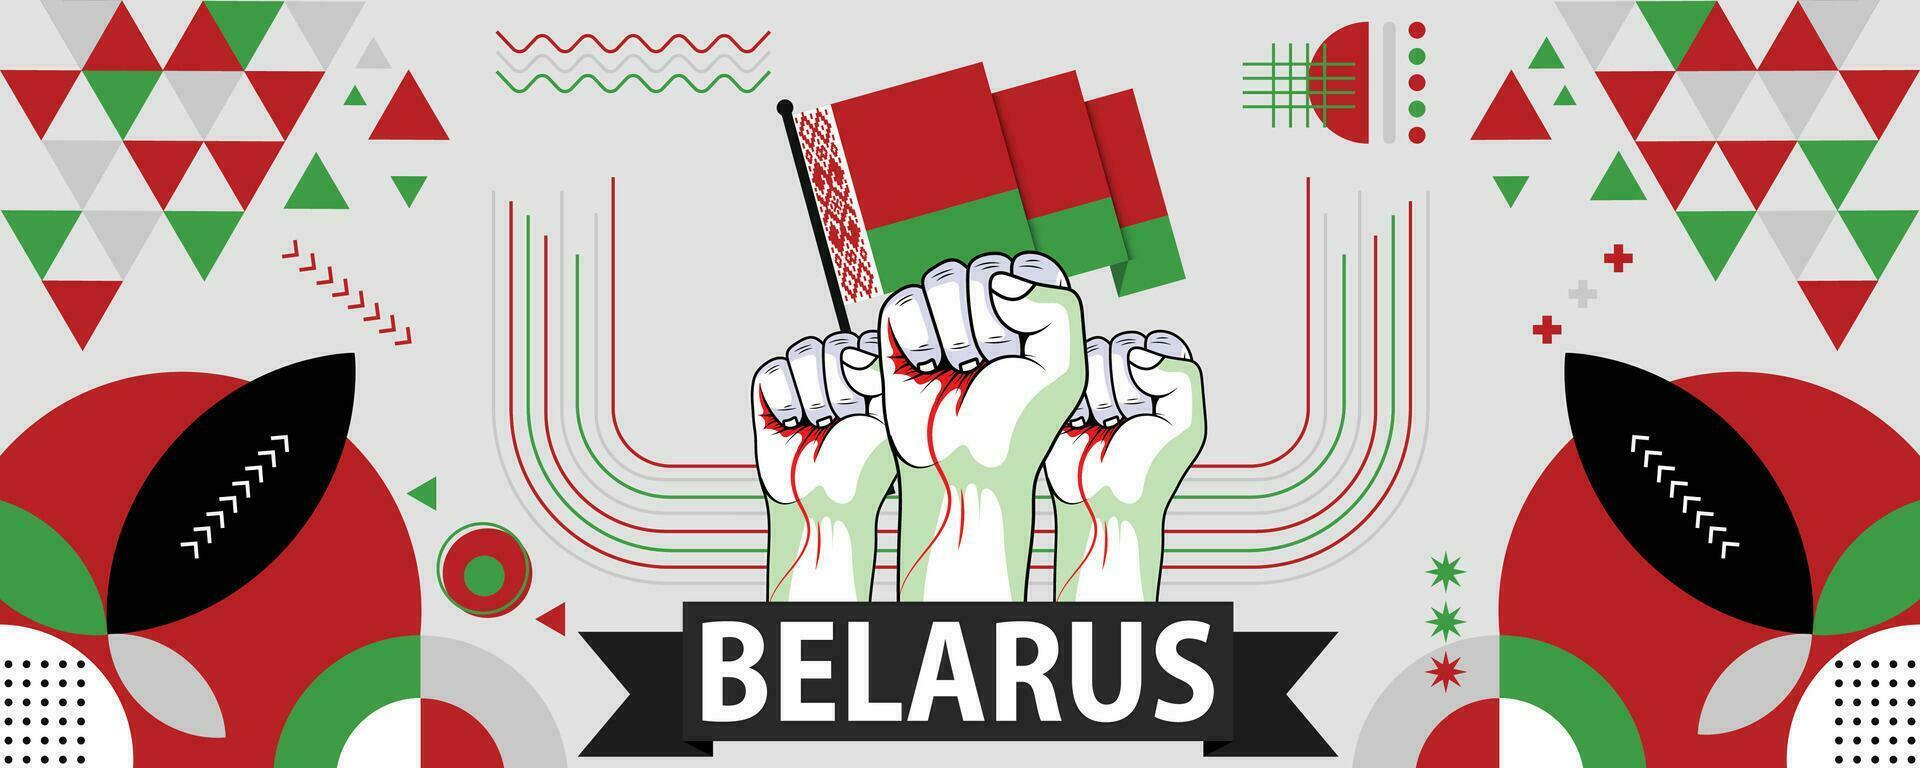 Belarus national or independence day banner for country celebration. Flag of Belarus with raised fists. Modern retro design with typorgaphy abstract geometric icons. Vector illustration.